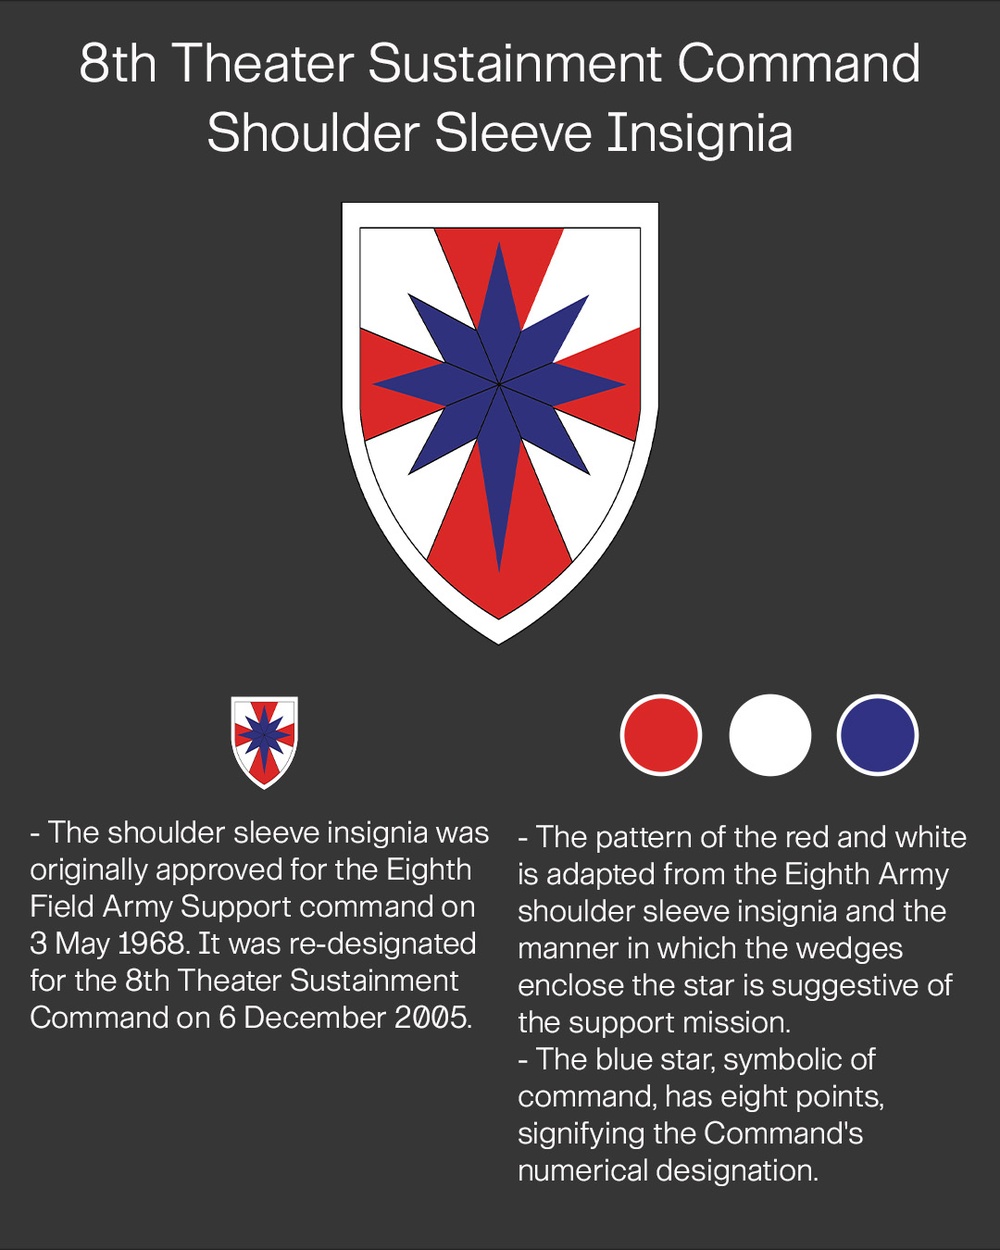 8th Theater Sustainment Command Shoulder Sleeve Insignia